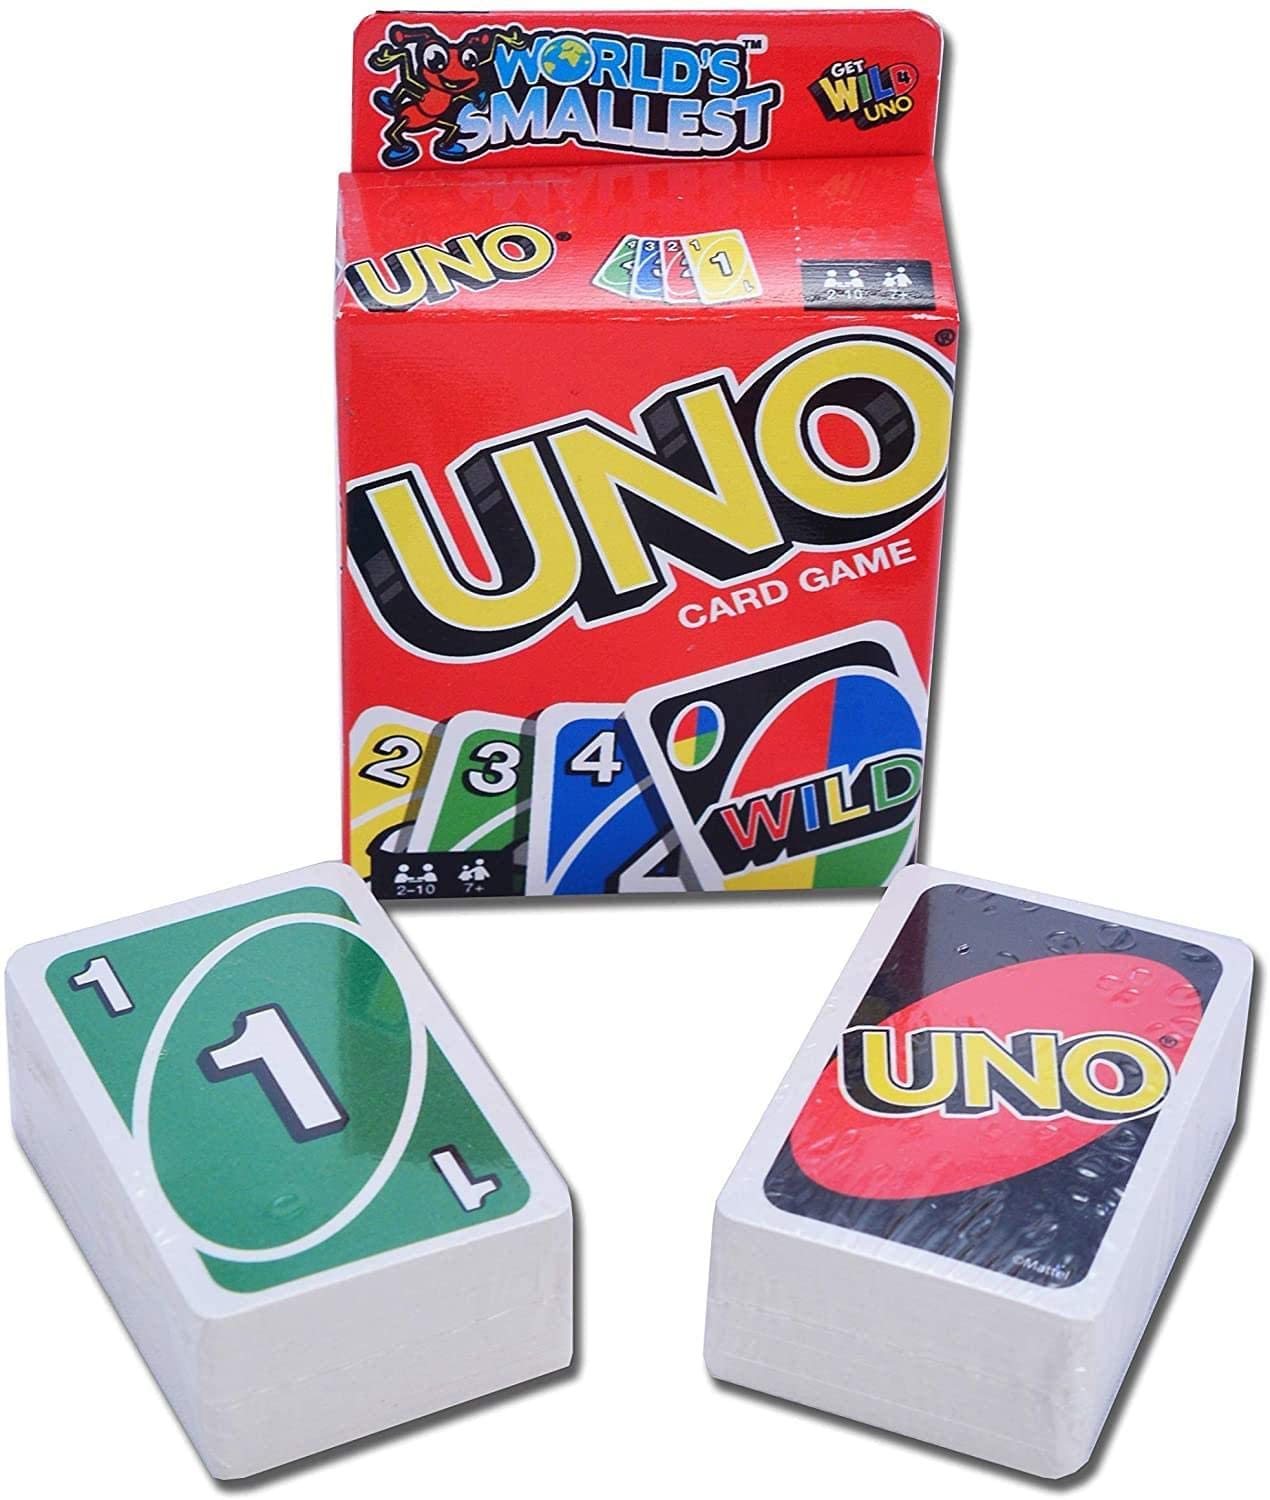 World's Smallest Uno | Stocking Stuffers For Gamers | Amazon Stocking Stuffers | Stocking stuffers For Adults | stocking stuffers for men | mens stocking stuffers | Stocking stuffers for her | Stocking stuffers for guys | Cheap stocking stuffers | Best stocking stuffers | Stocking stuffers for wife | stocking stuffer gifts | Best stocking stuffers 